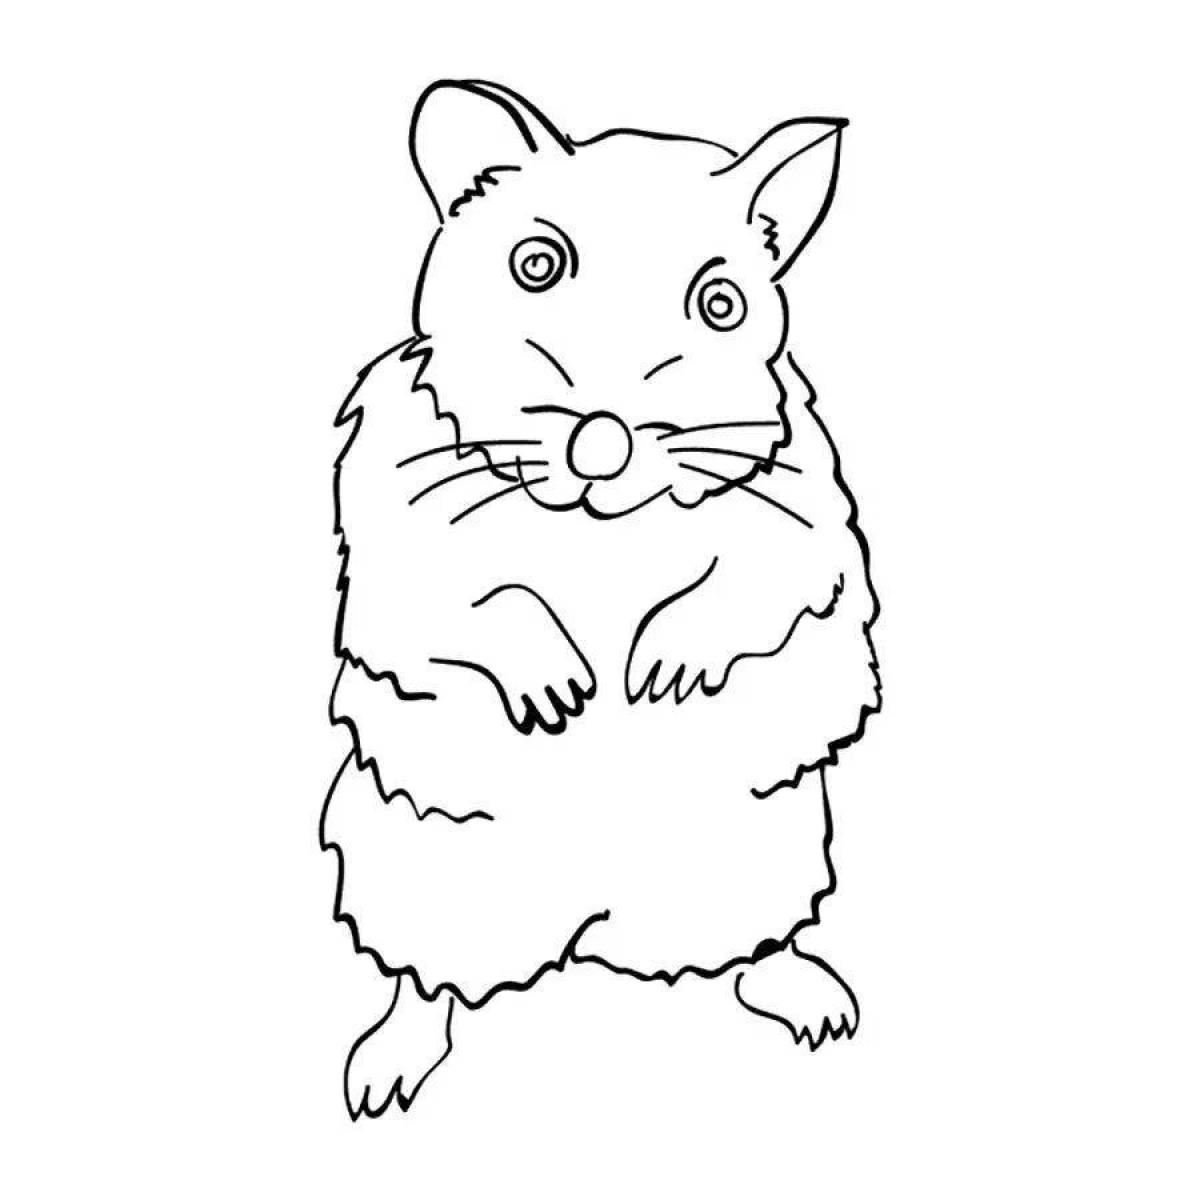 Colorful coloring drawing of a hamster